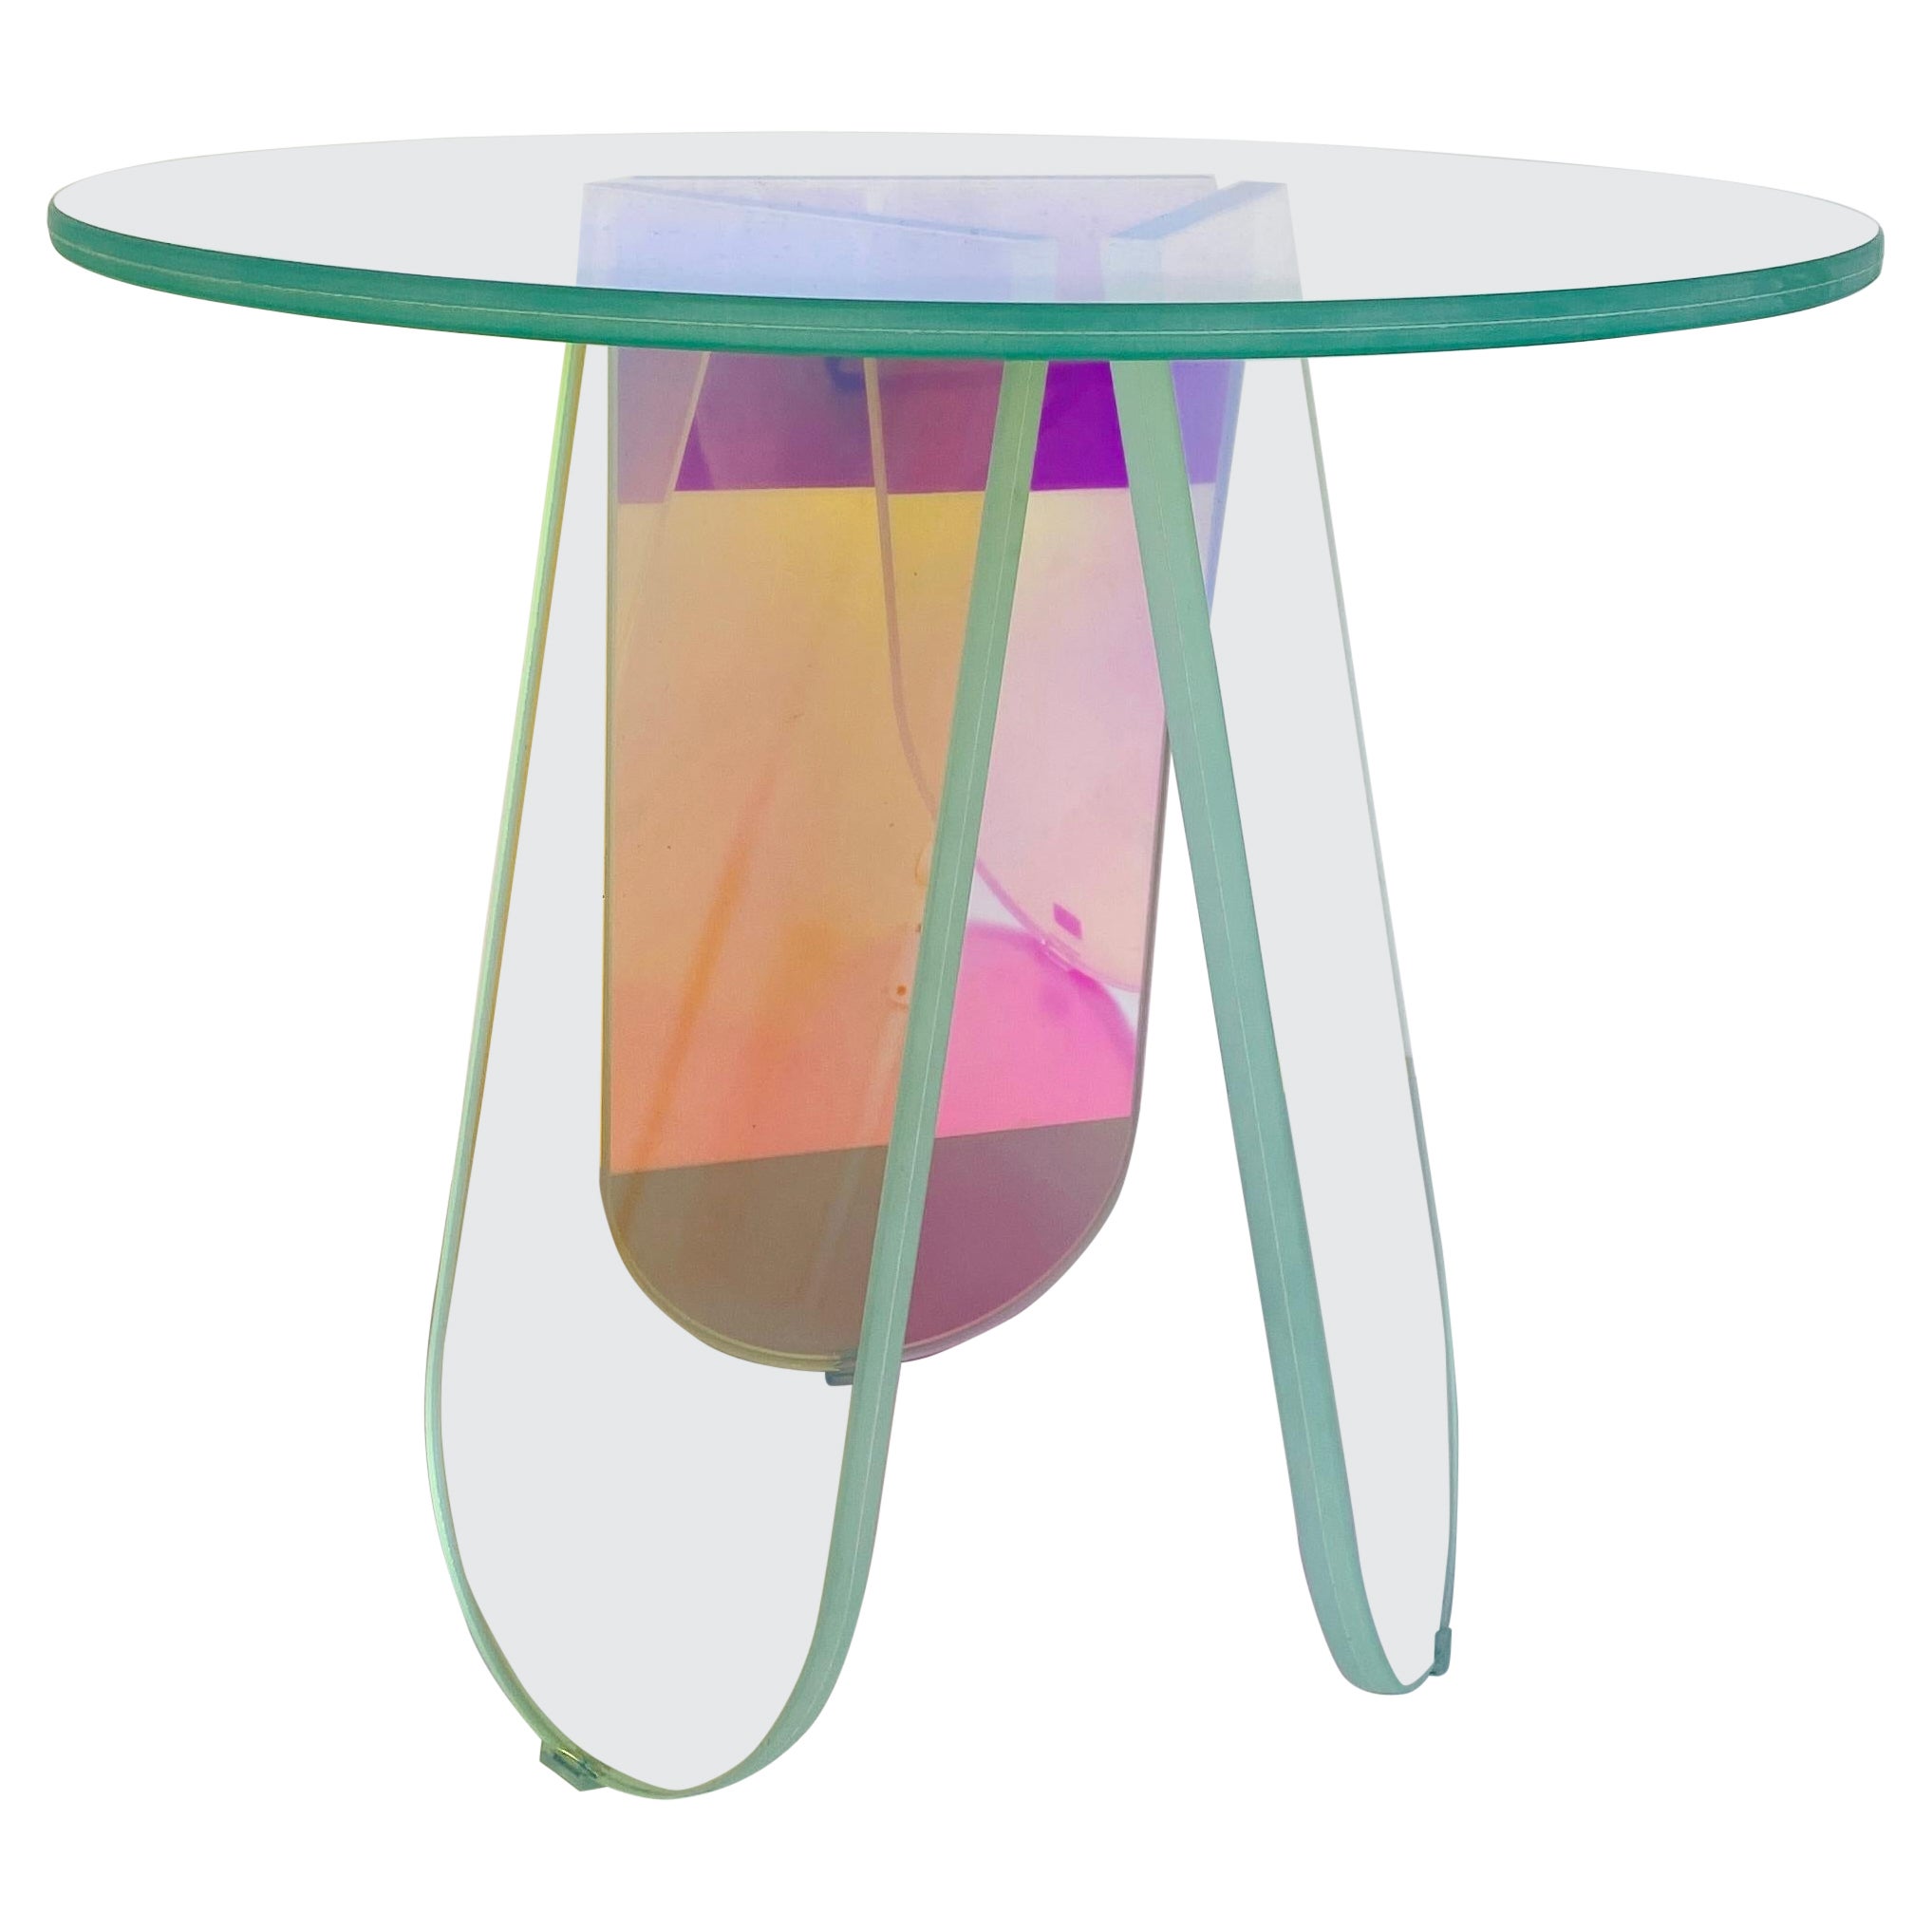 Round Iridescent Glass Coffee Table by Patricia Urquiola for Glas Italia, 2015